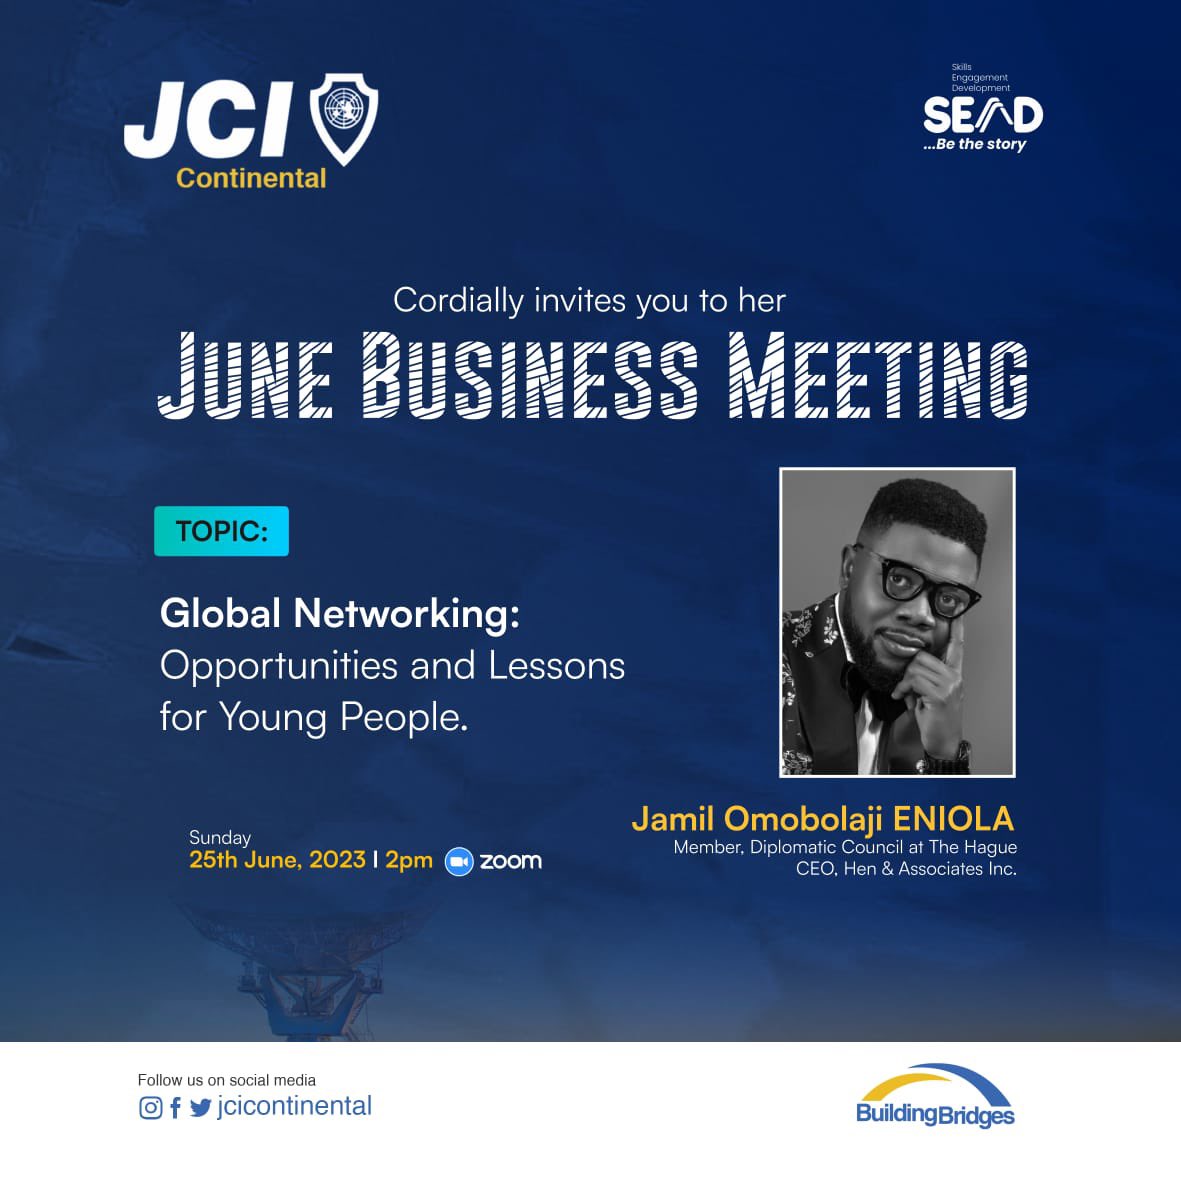 “A life is not important except in the impact it has on other lives”

JCI Continental is hosting her June Business Meeting TODAY.

Time: Jun 25, 2023 02:00 PM West Central Africa
@jcicontinental @jci_nigeria 

#GlobalNetworking
#JCIContinental
#BuildingBridges
#SEnD2023